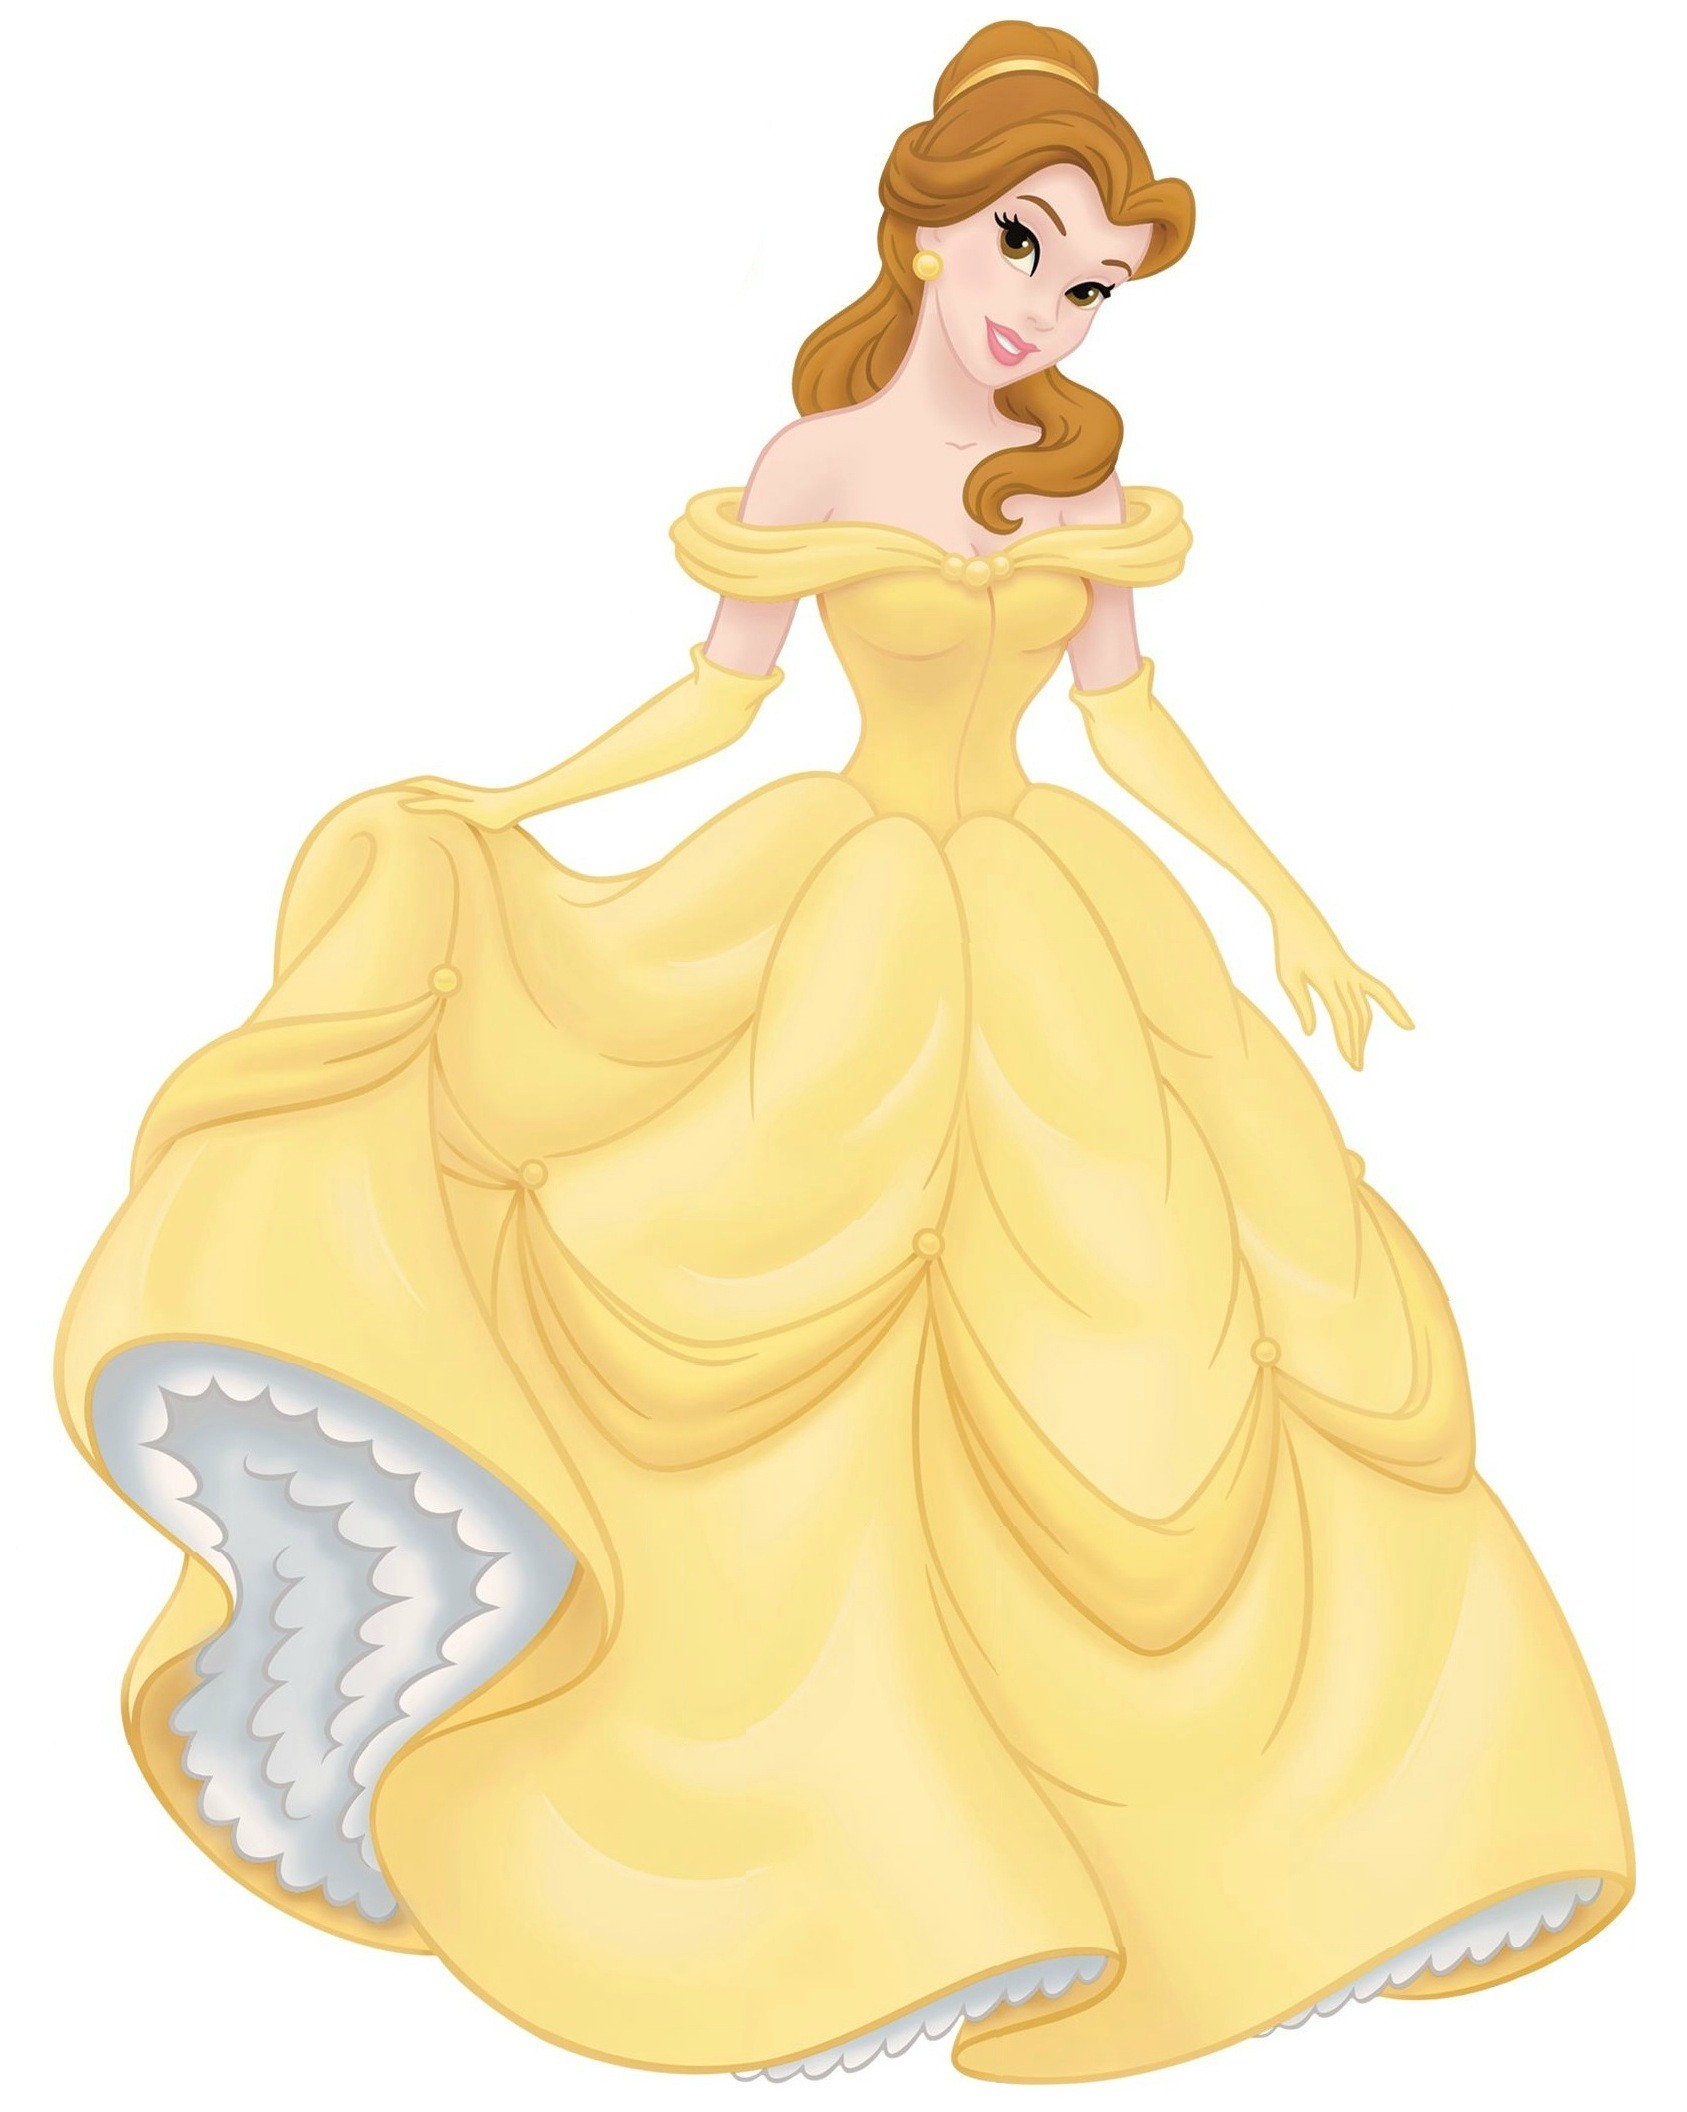 1687x2112 The official artwork of Princess Belle. HD Wallpaper and background photos  of Princess Belle for fans of Disney Princess images.